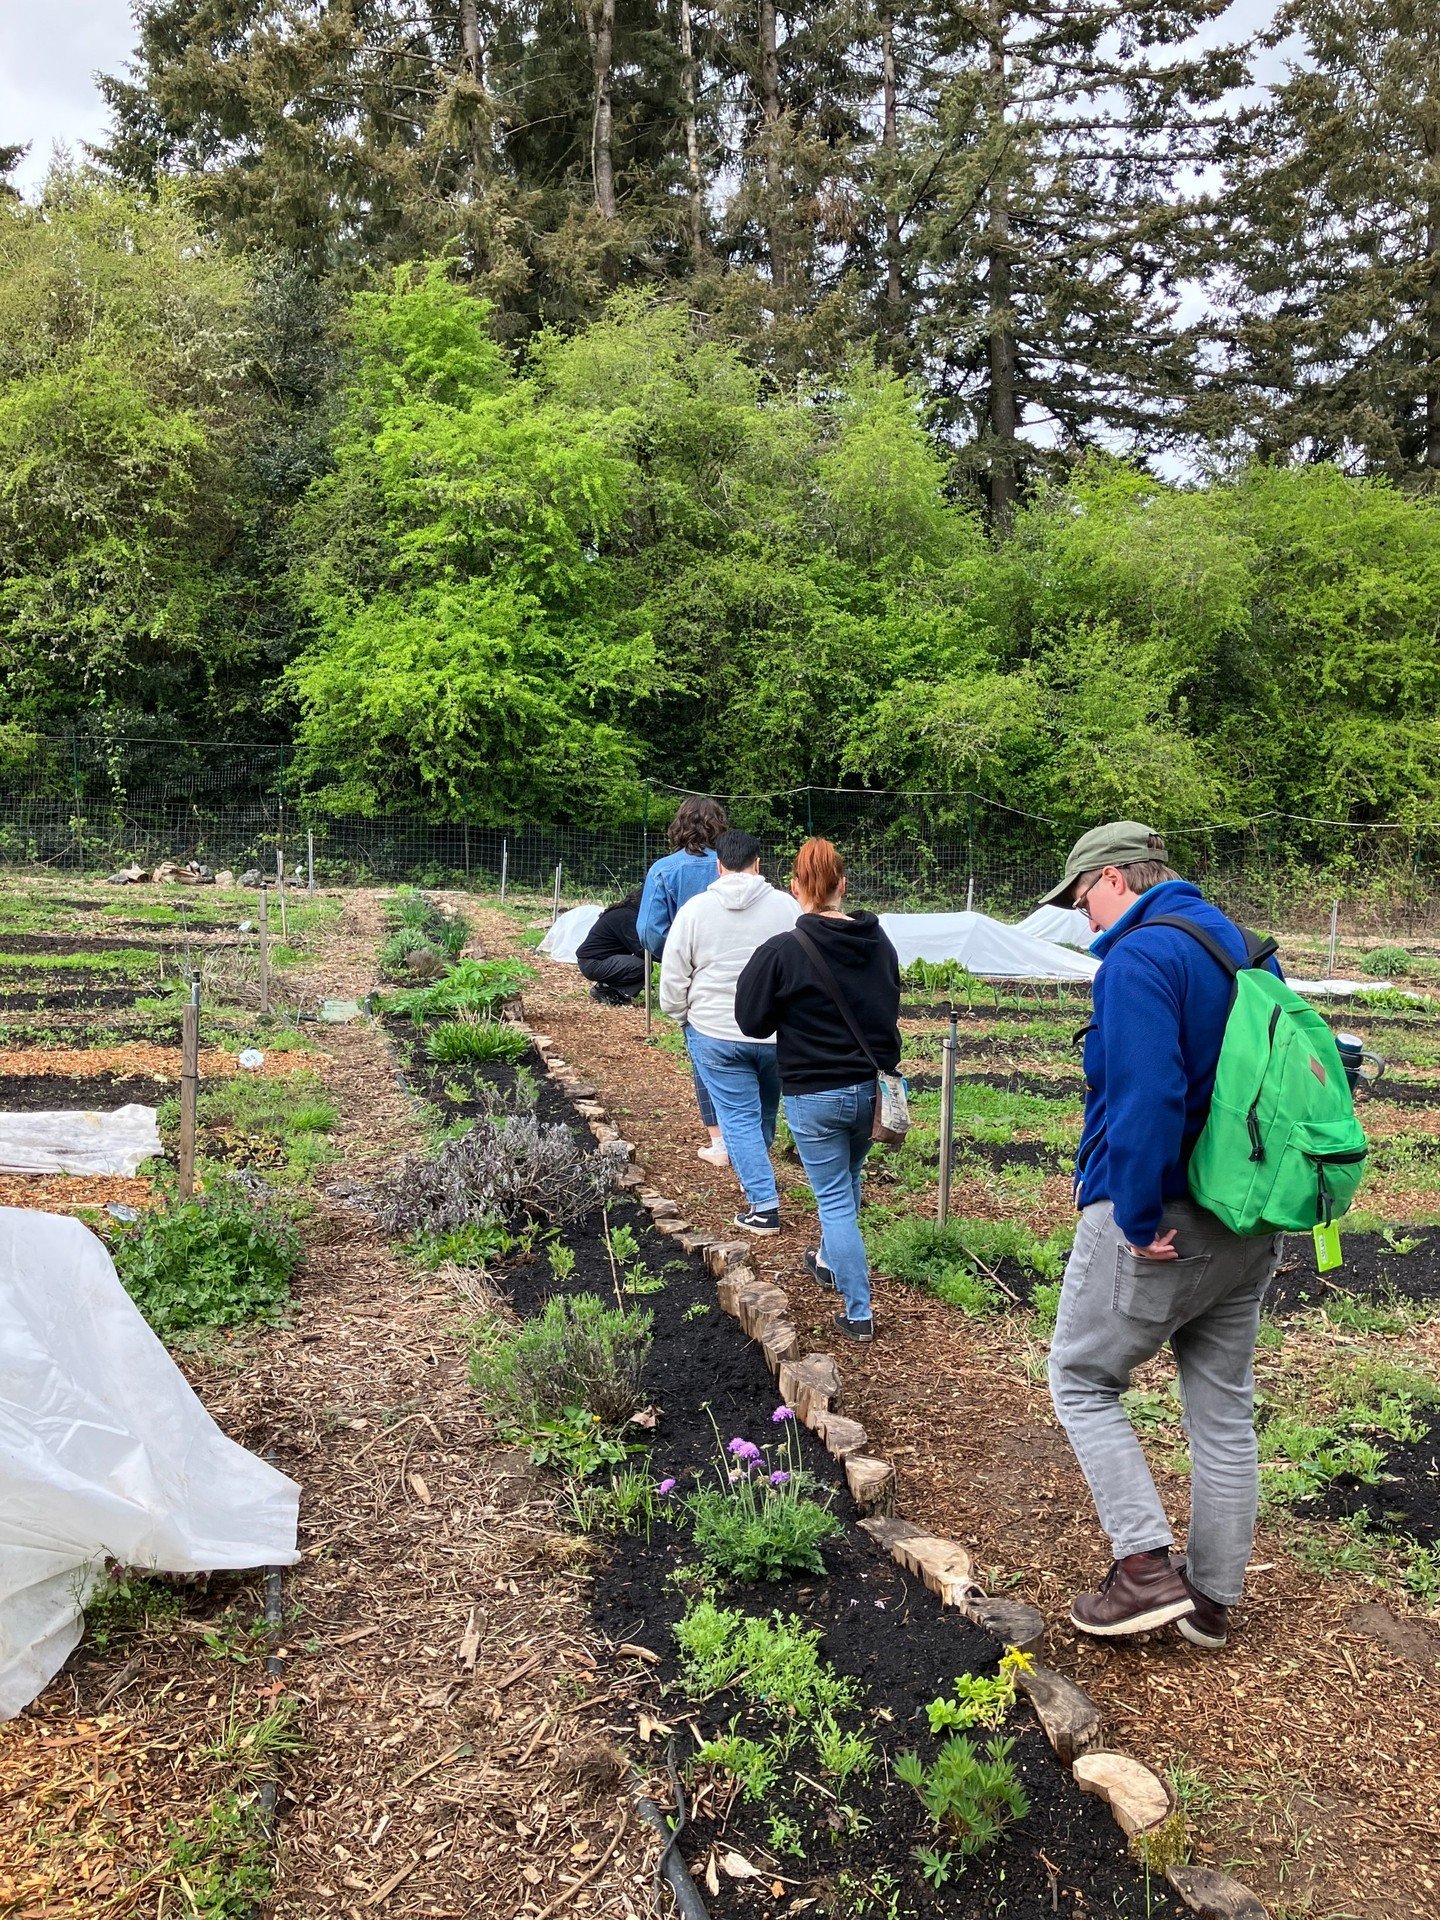 Exciting news! Our Community Education team recently #YouthEngagement #SummerProgramming #YouthEmpowerment completed a successful tour with @KindnessFarm, solidifying a promising partnership for engaging youth in our summer programming. Stay tuned fo